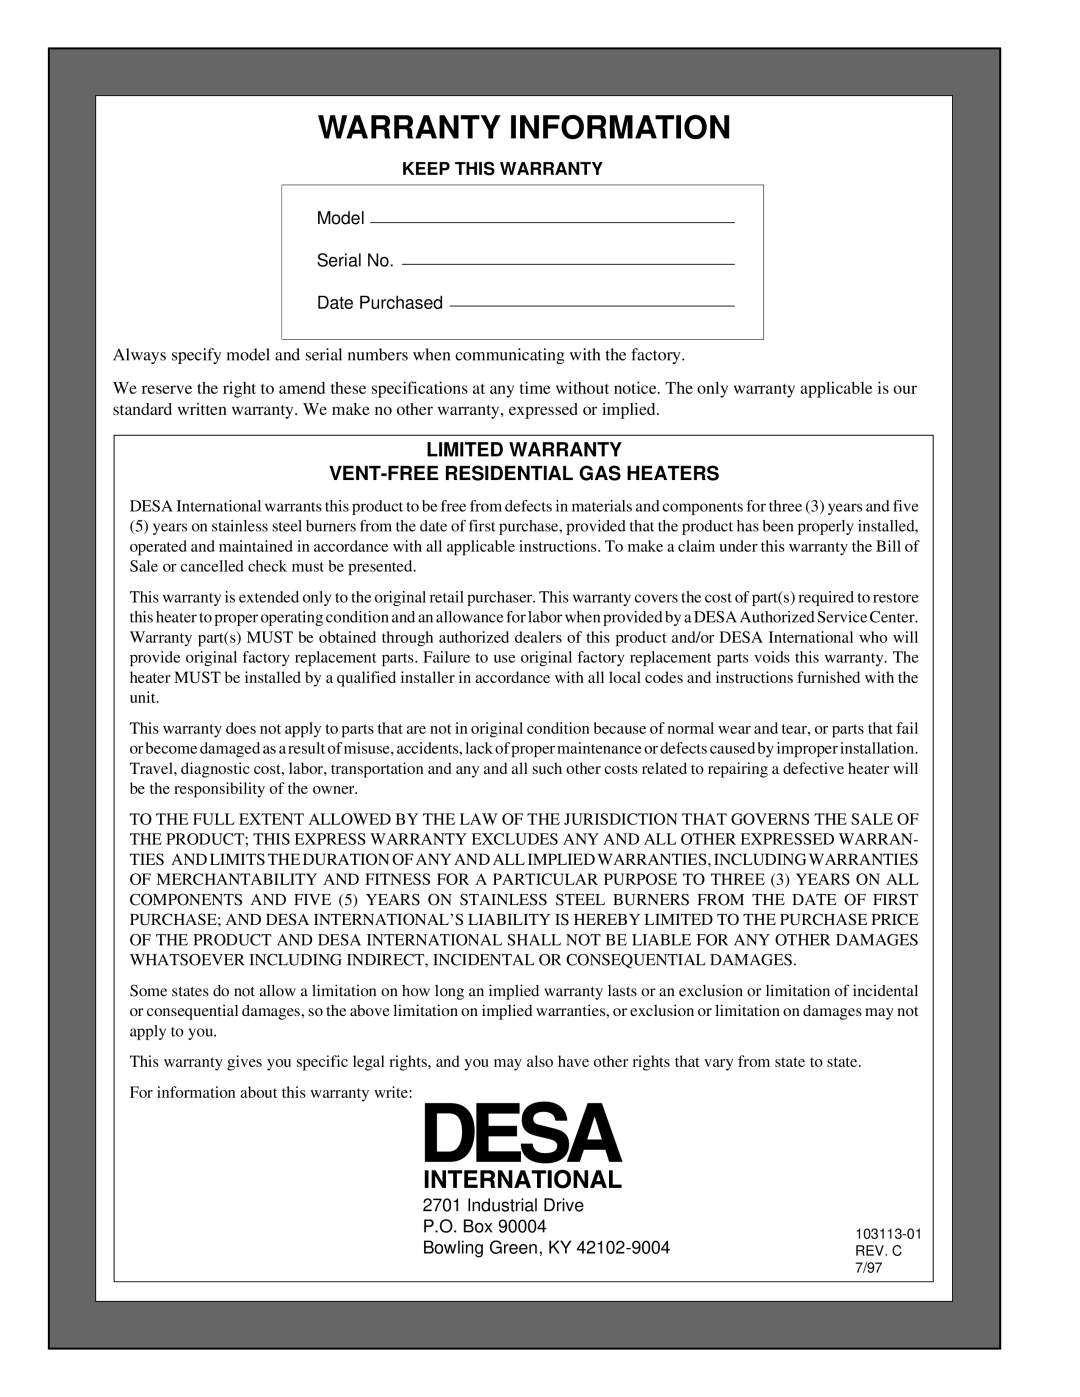 Desa BLUE FLAME VENT-FREE NATURAL GAS HEATER Warranty Information, Limited Warranty Vent-Freeresidential Gas Heaters 